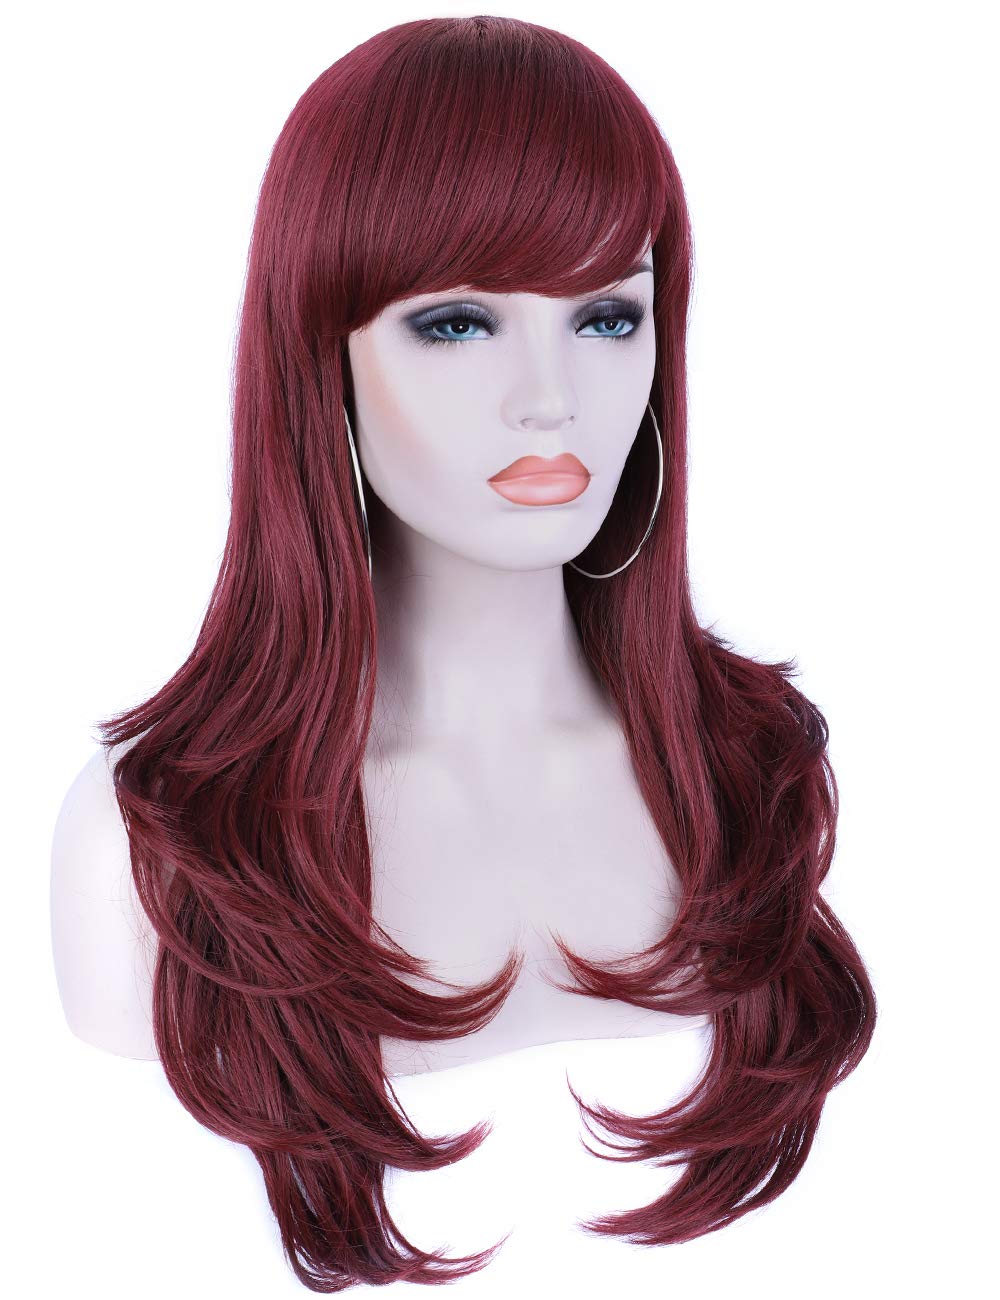 Lush Locks Burgundy Red Hair Synthetic Wigs for Women